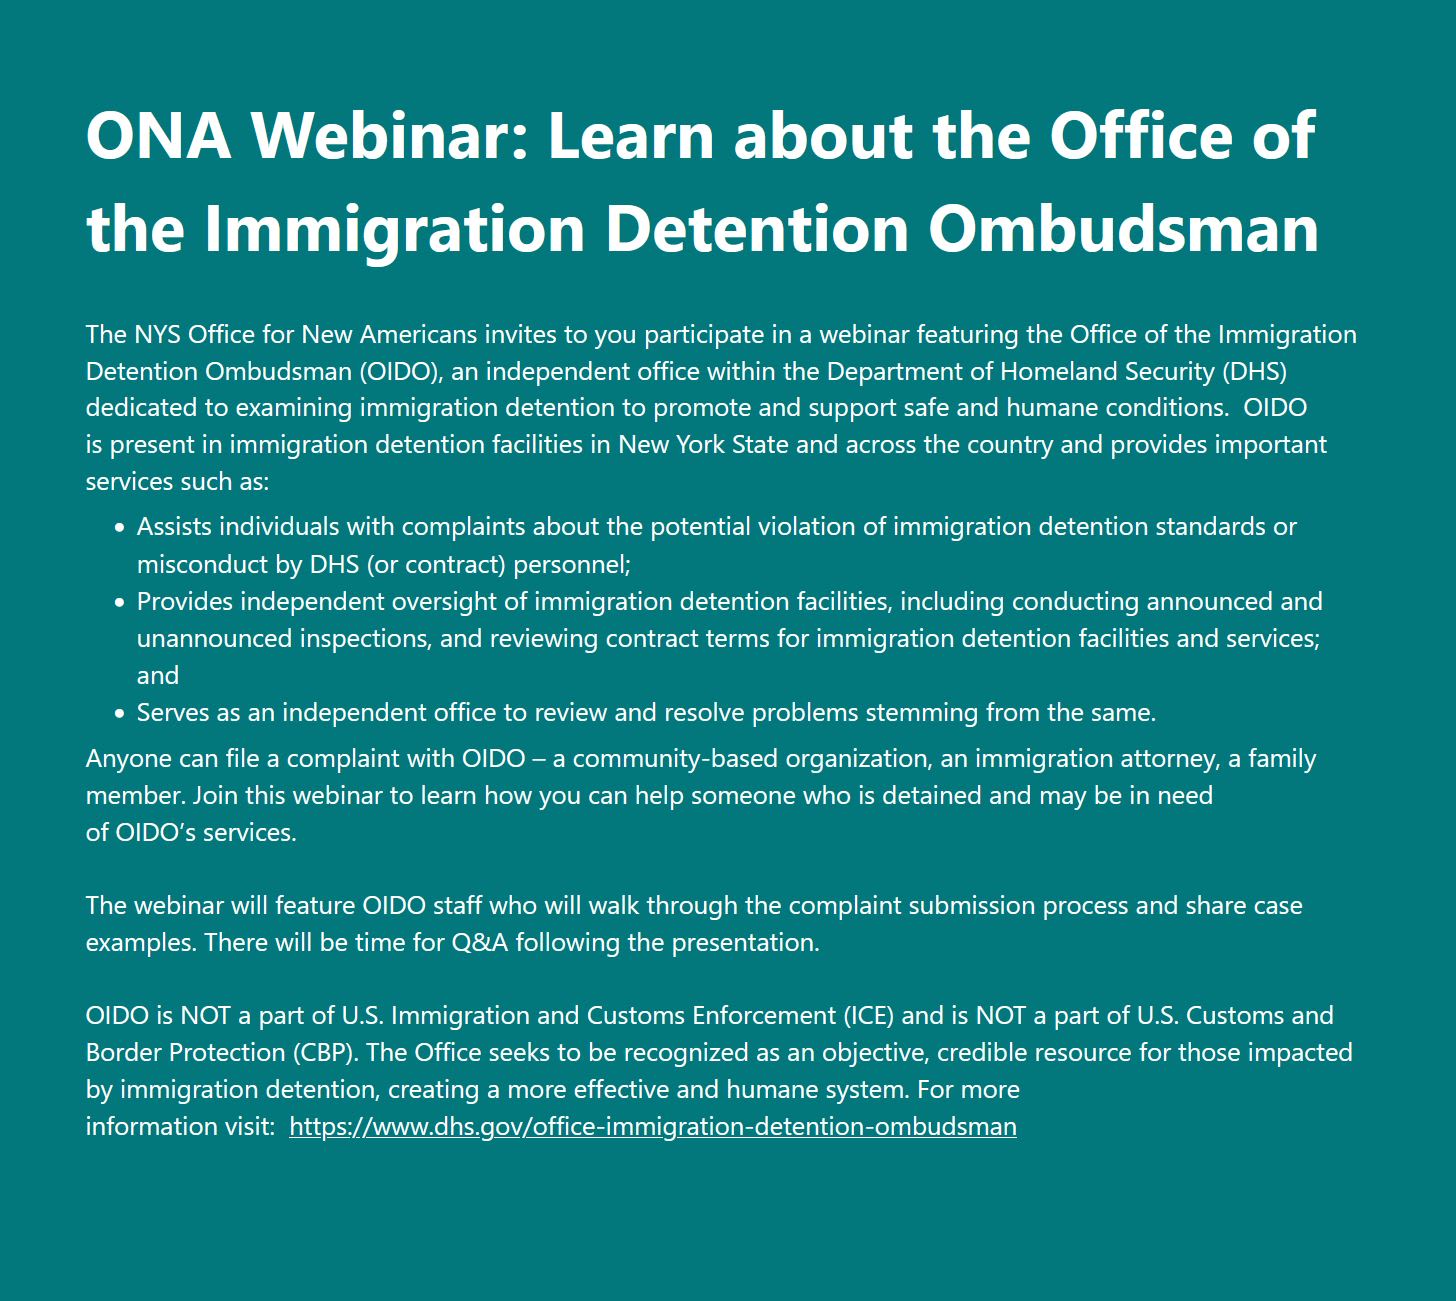 Webinar: The Office of the Immigration Detention Ombudsman